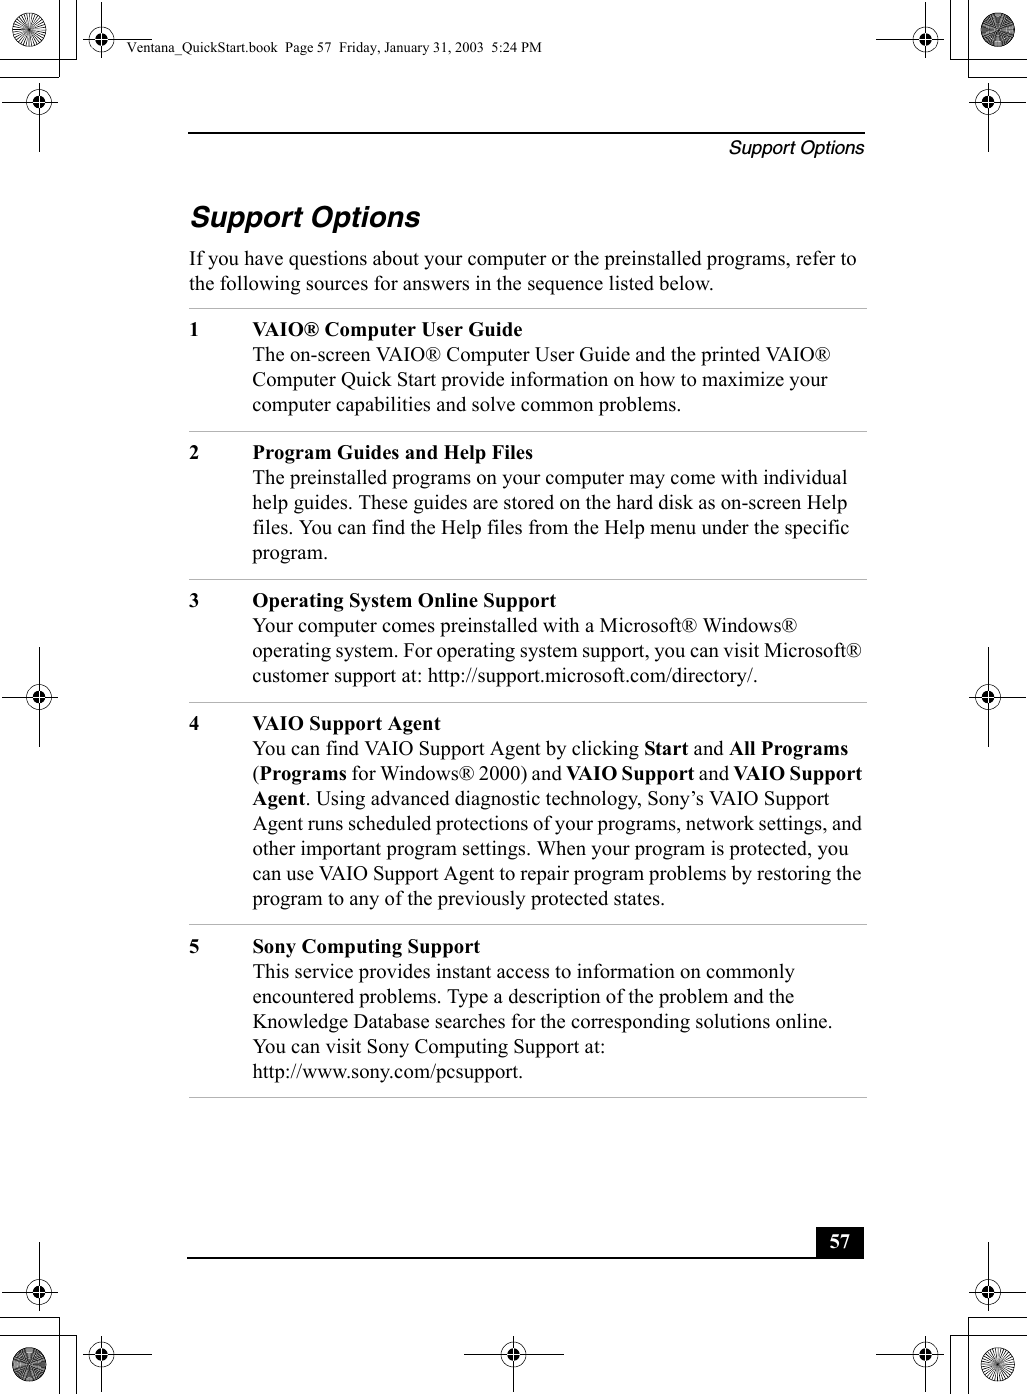 Support Options57Support OptionsIf you have questions about your computer or the preinstalled programs, refer to the following sources for answers in the sequence listed below.1 VAIO® Computer User GuideThe on-screen VAIO® Computer User Guide and the printed VAIO® Computer Quick Start provide information on how to maximize your computer capabilities and solve common problems.2 Program Guides and Help FilesThe preinstalled programs on your computer may come with individual help guides. These guides are stored on the hard disk as on-screen Help files. You can find the Help files from the Help menu under the specific program. 3 Operating System Online SupportYour computer comes preinstalled with a Microsoft® Windows® operating system. For operating system support, you can visit Microsoft® customer support at: http://support.microsoft.com/directory/.4 VAIO Support AgentYou can find VAIO Support Agent by clicking Start and All Programs (Programs for Windows® 2000) and VAIO Support and VAIO Support Agent. Using advanced diagnostic technology, Sony’s VAIO Support Agent runs scheduled protections of your programs, network settings, and other important program settings. When your program is protected, you can use VAIO Support Agent to repair program problems by restoring the program to any of the previously protected states.5 Sony Computing SupportThis service provides instant access to information on commonly encountered problems. Type a description of the problem and the Knowledge Database searches for the corresponding solutions online. You can visit Sony Computing Support at: http://www.sony.com/pcsupport.Ventana_QuickStart.book  Page 57  Friday, January 31, 2003  5:24 PM